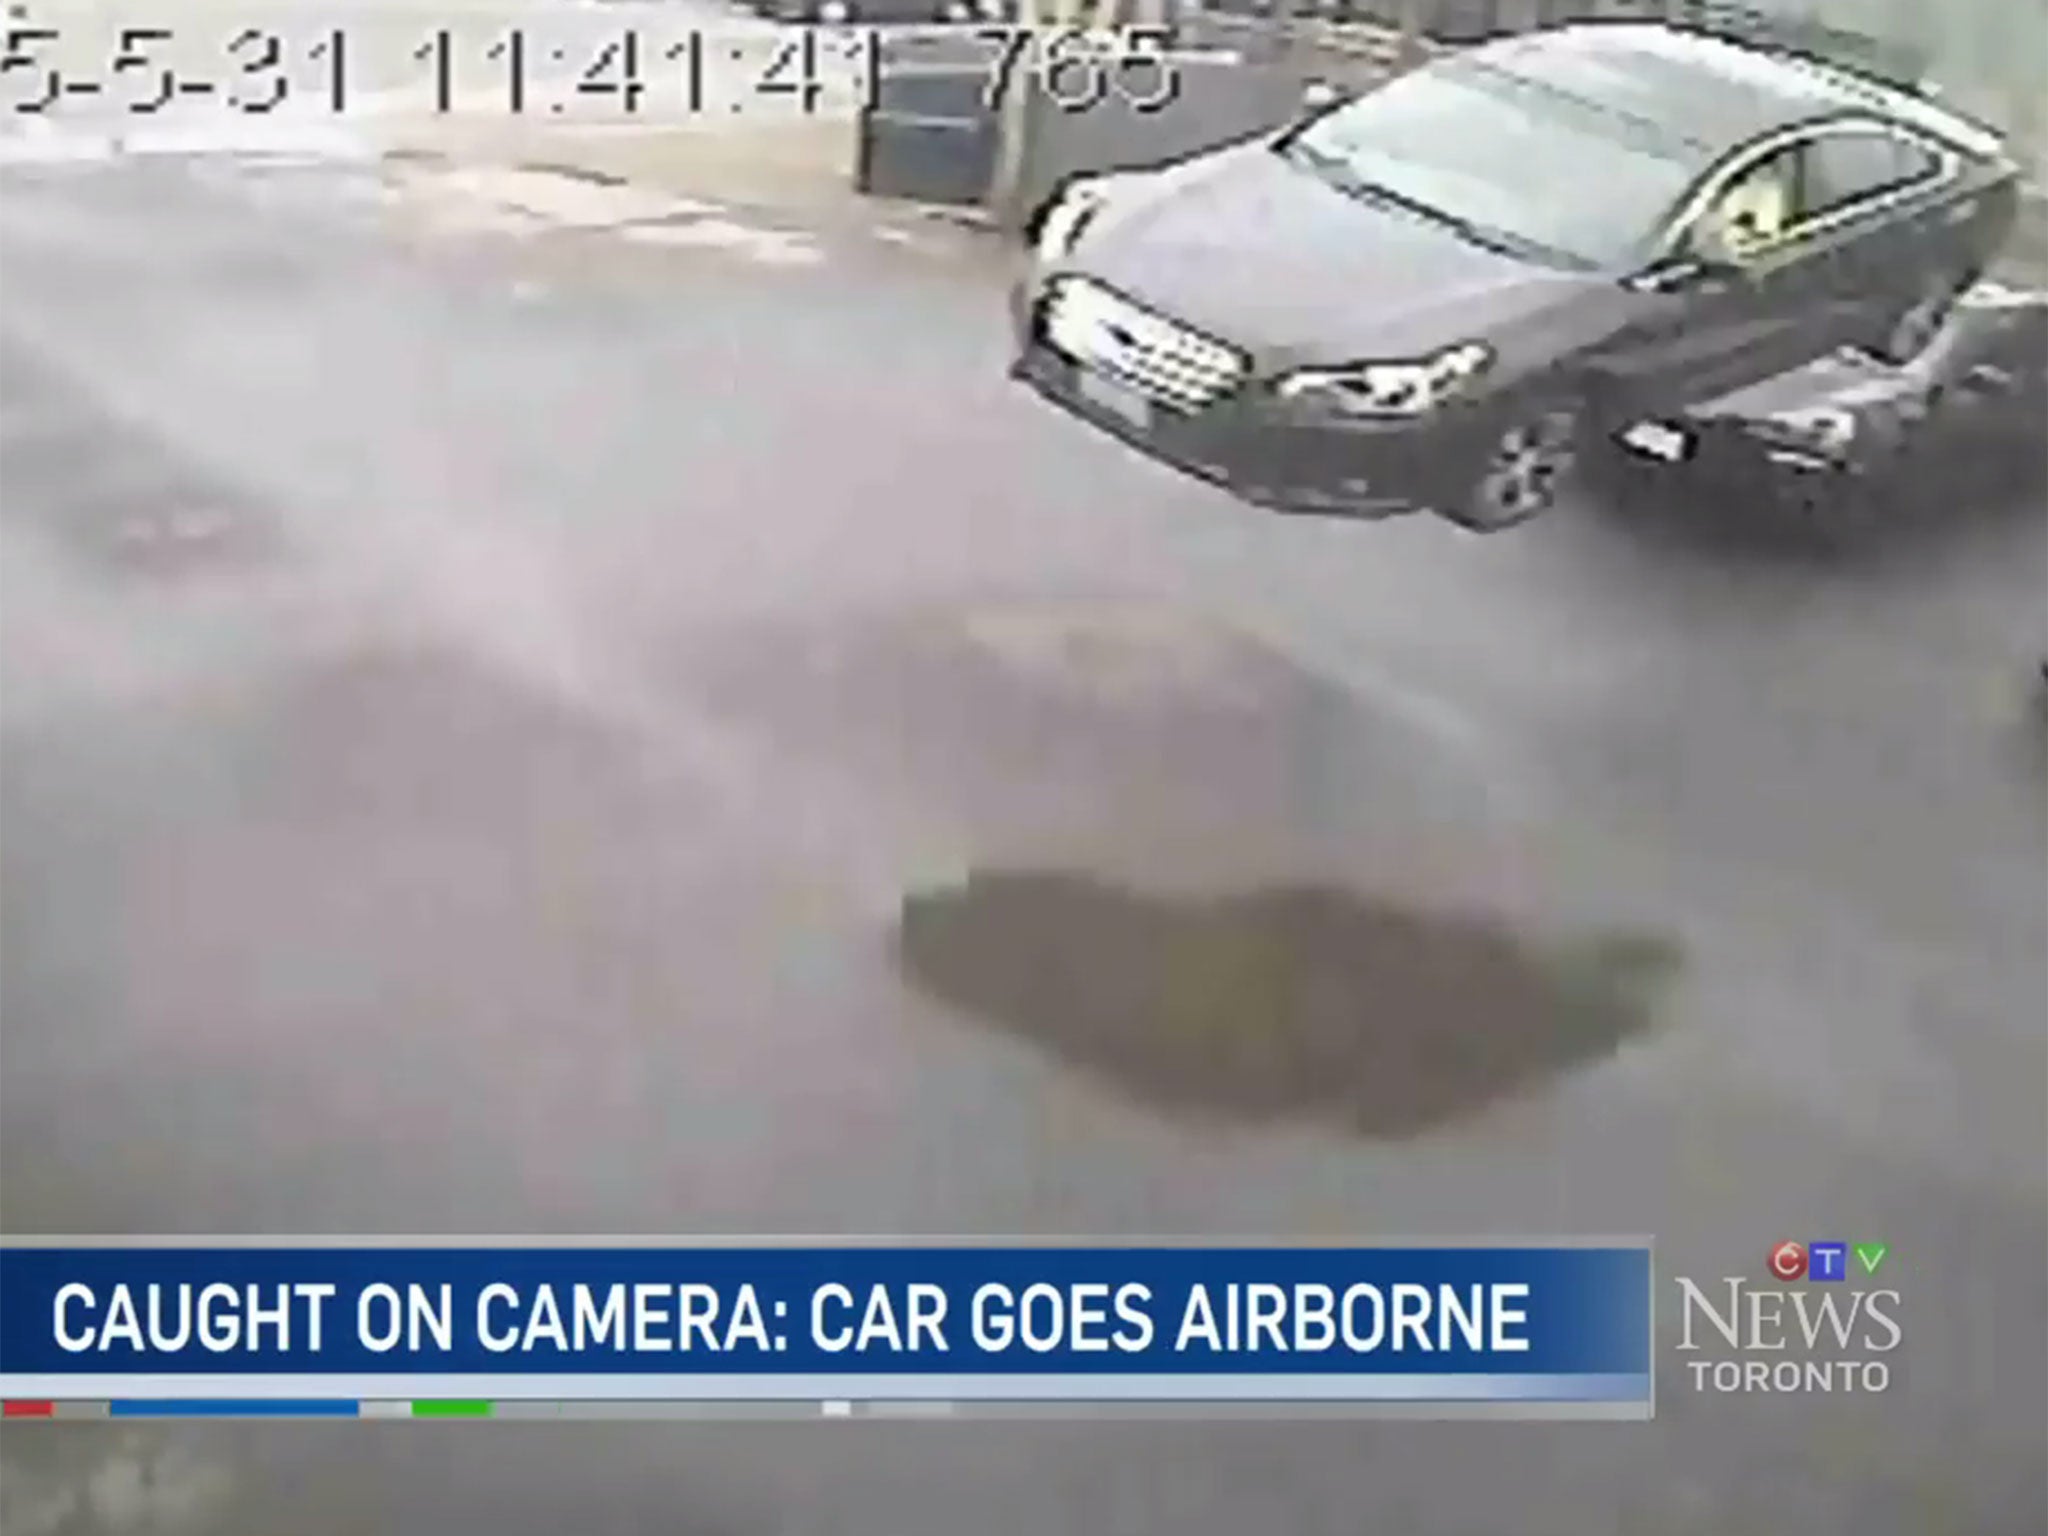 A dramatic car crash in Toronto, Canada, has been caught on CCTV camera